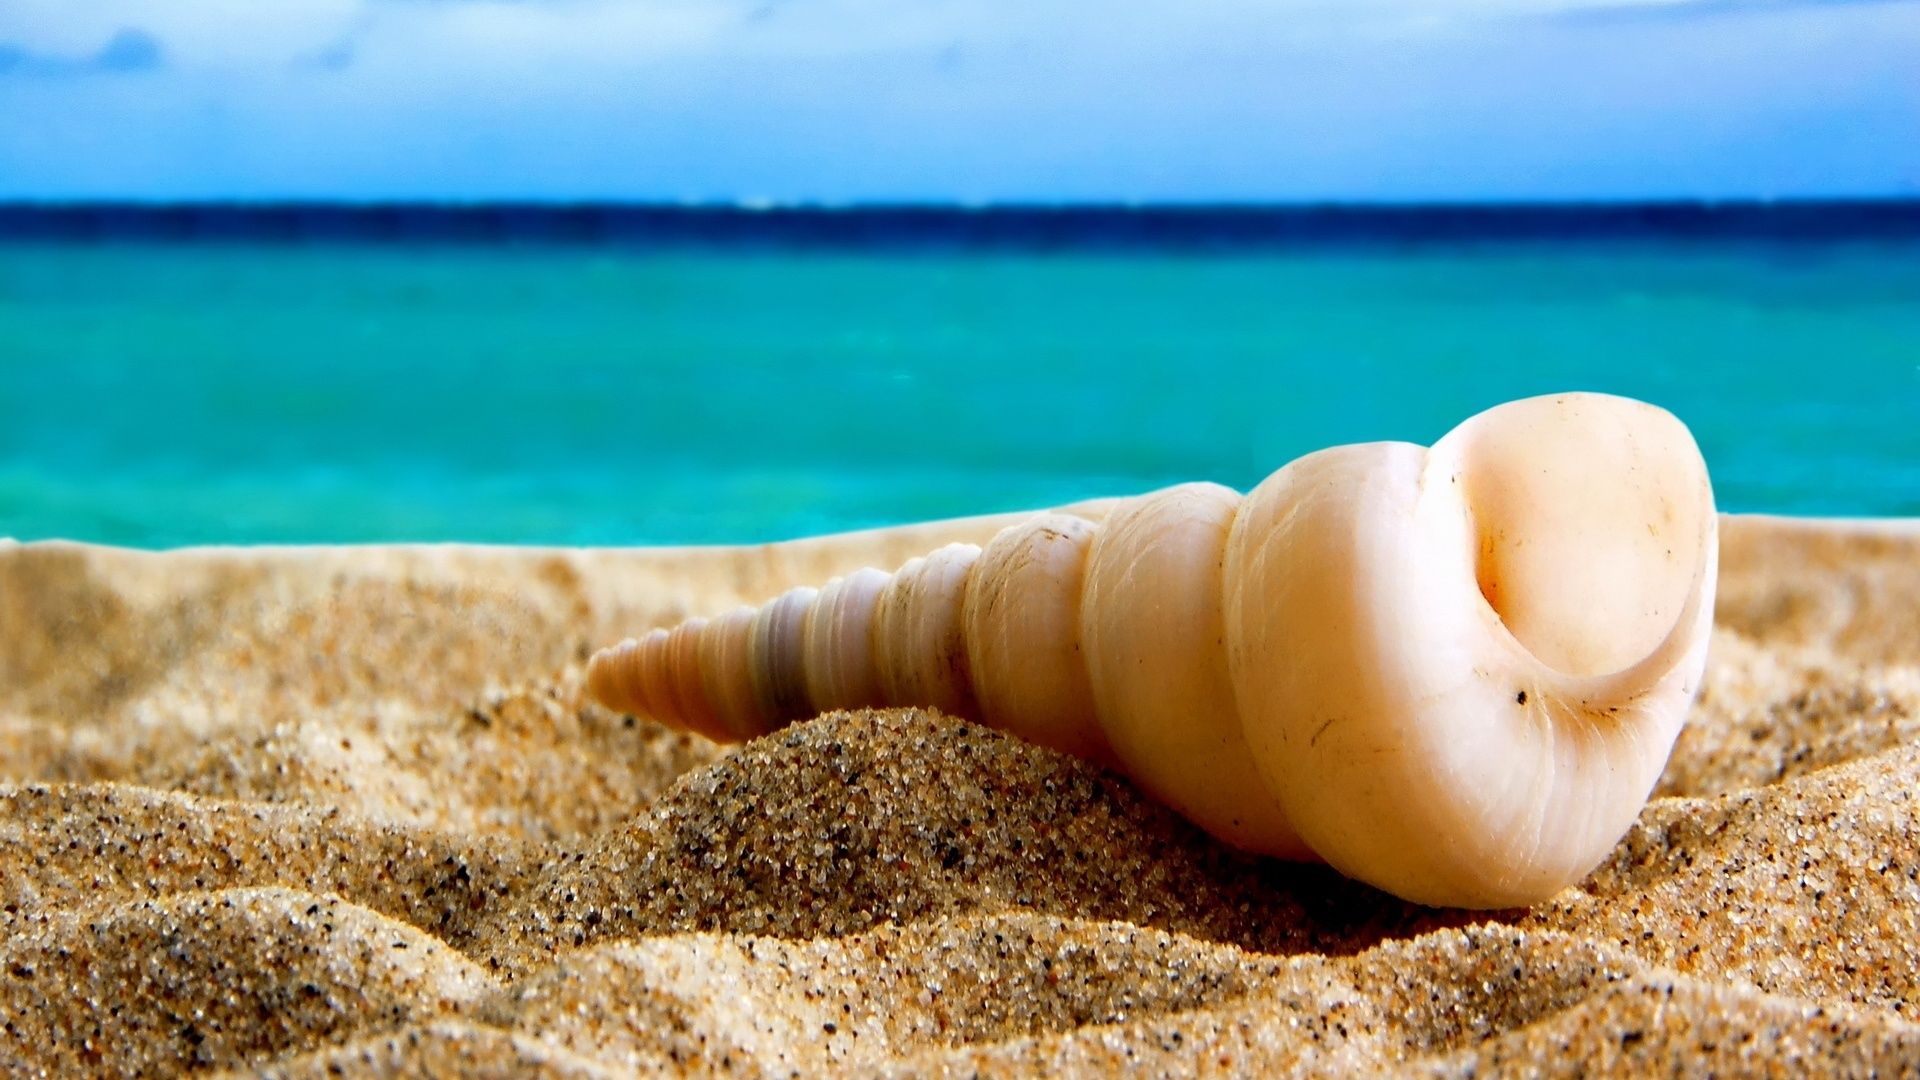 Of Wallpapers Images Of Seashells On The Sand